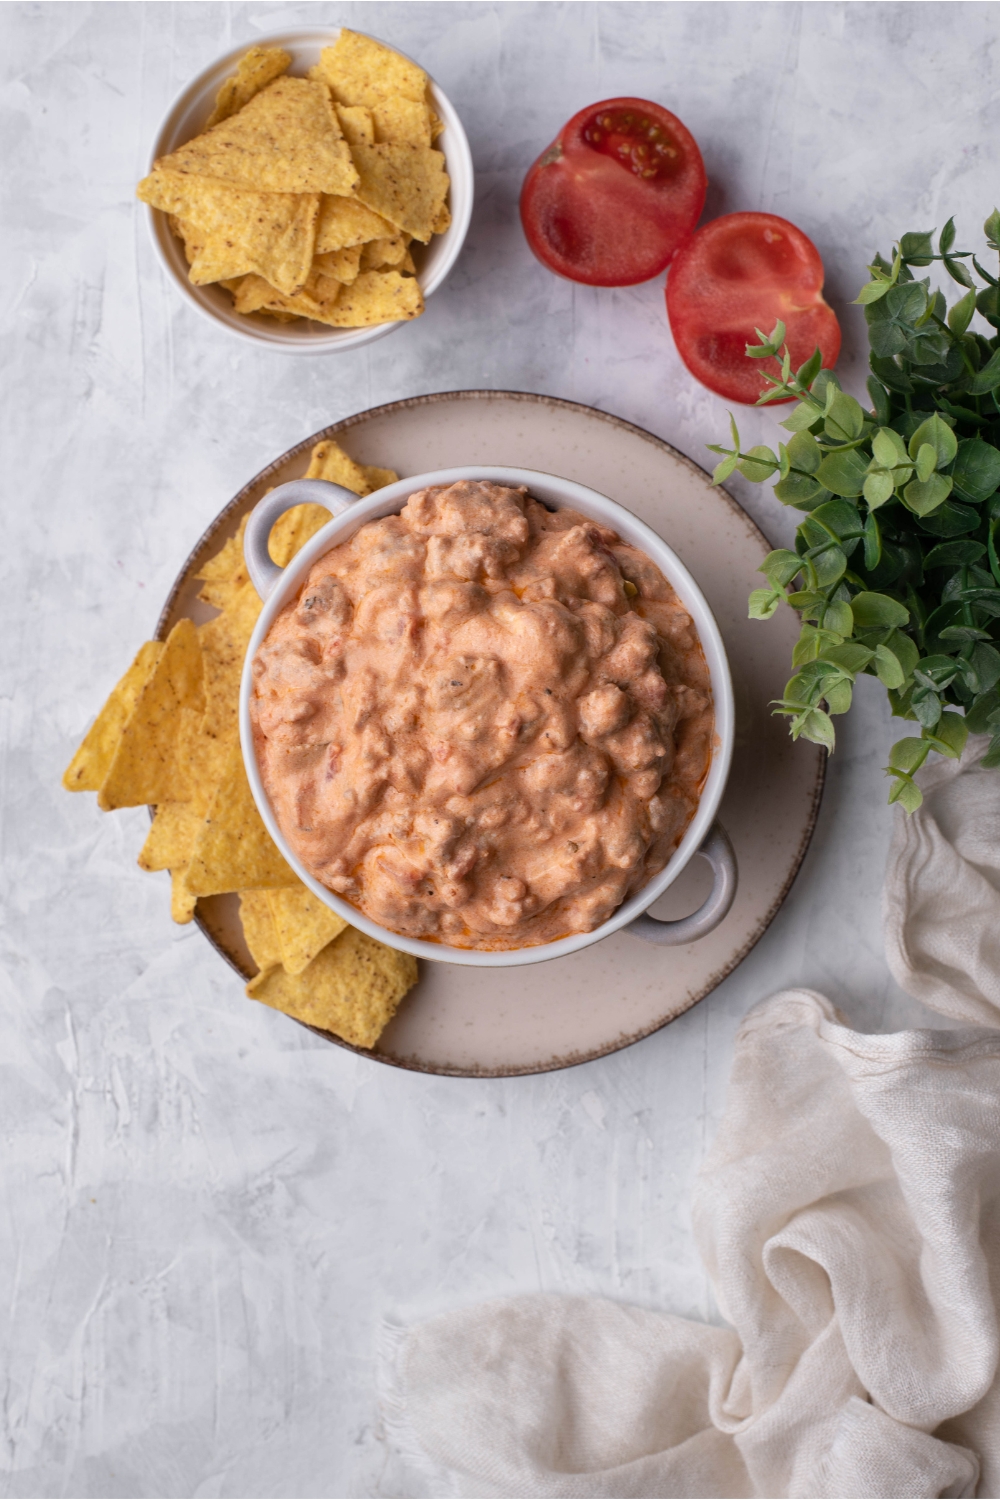 Cream cheese sausage dip in a serving bowl atop a plate of tortilla chips, surrounded by sliced tomatoes and a second bowl of tortilla chips.